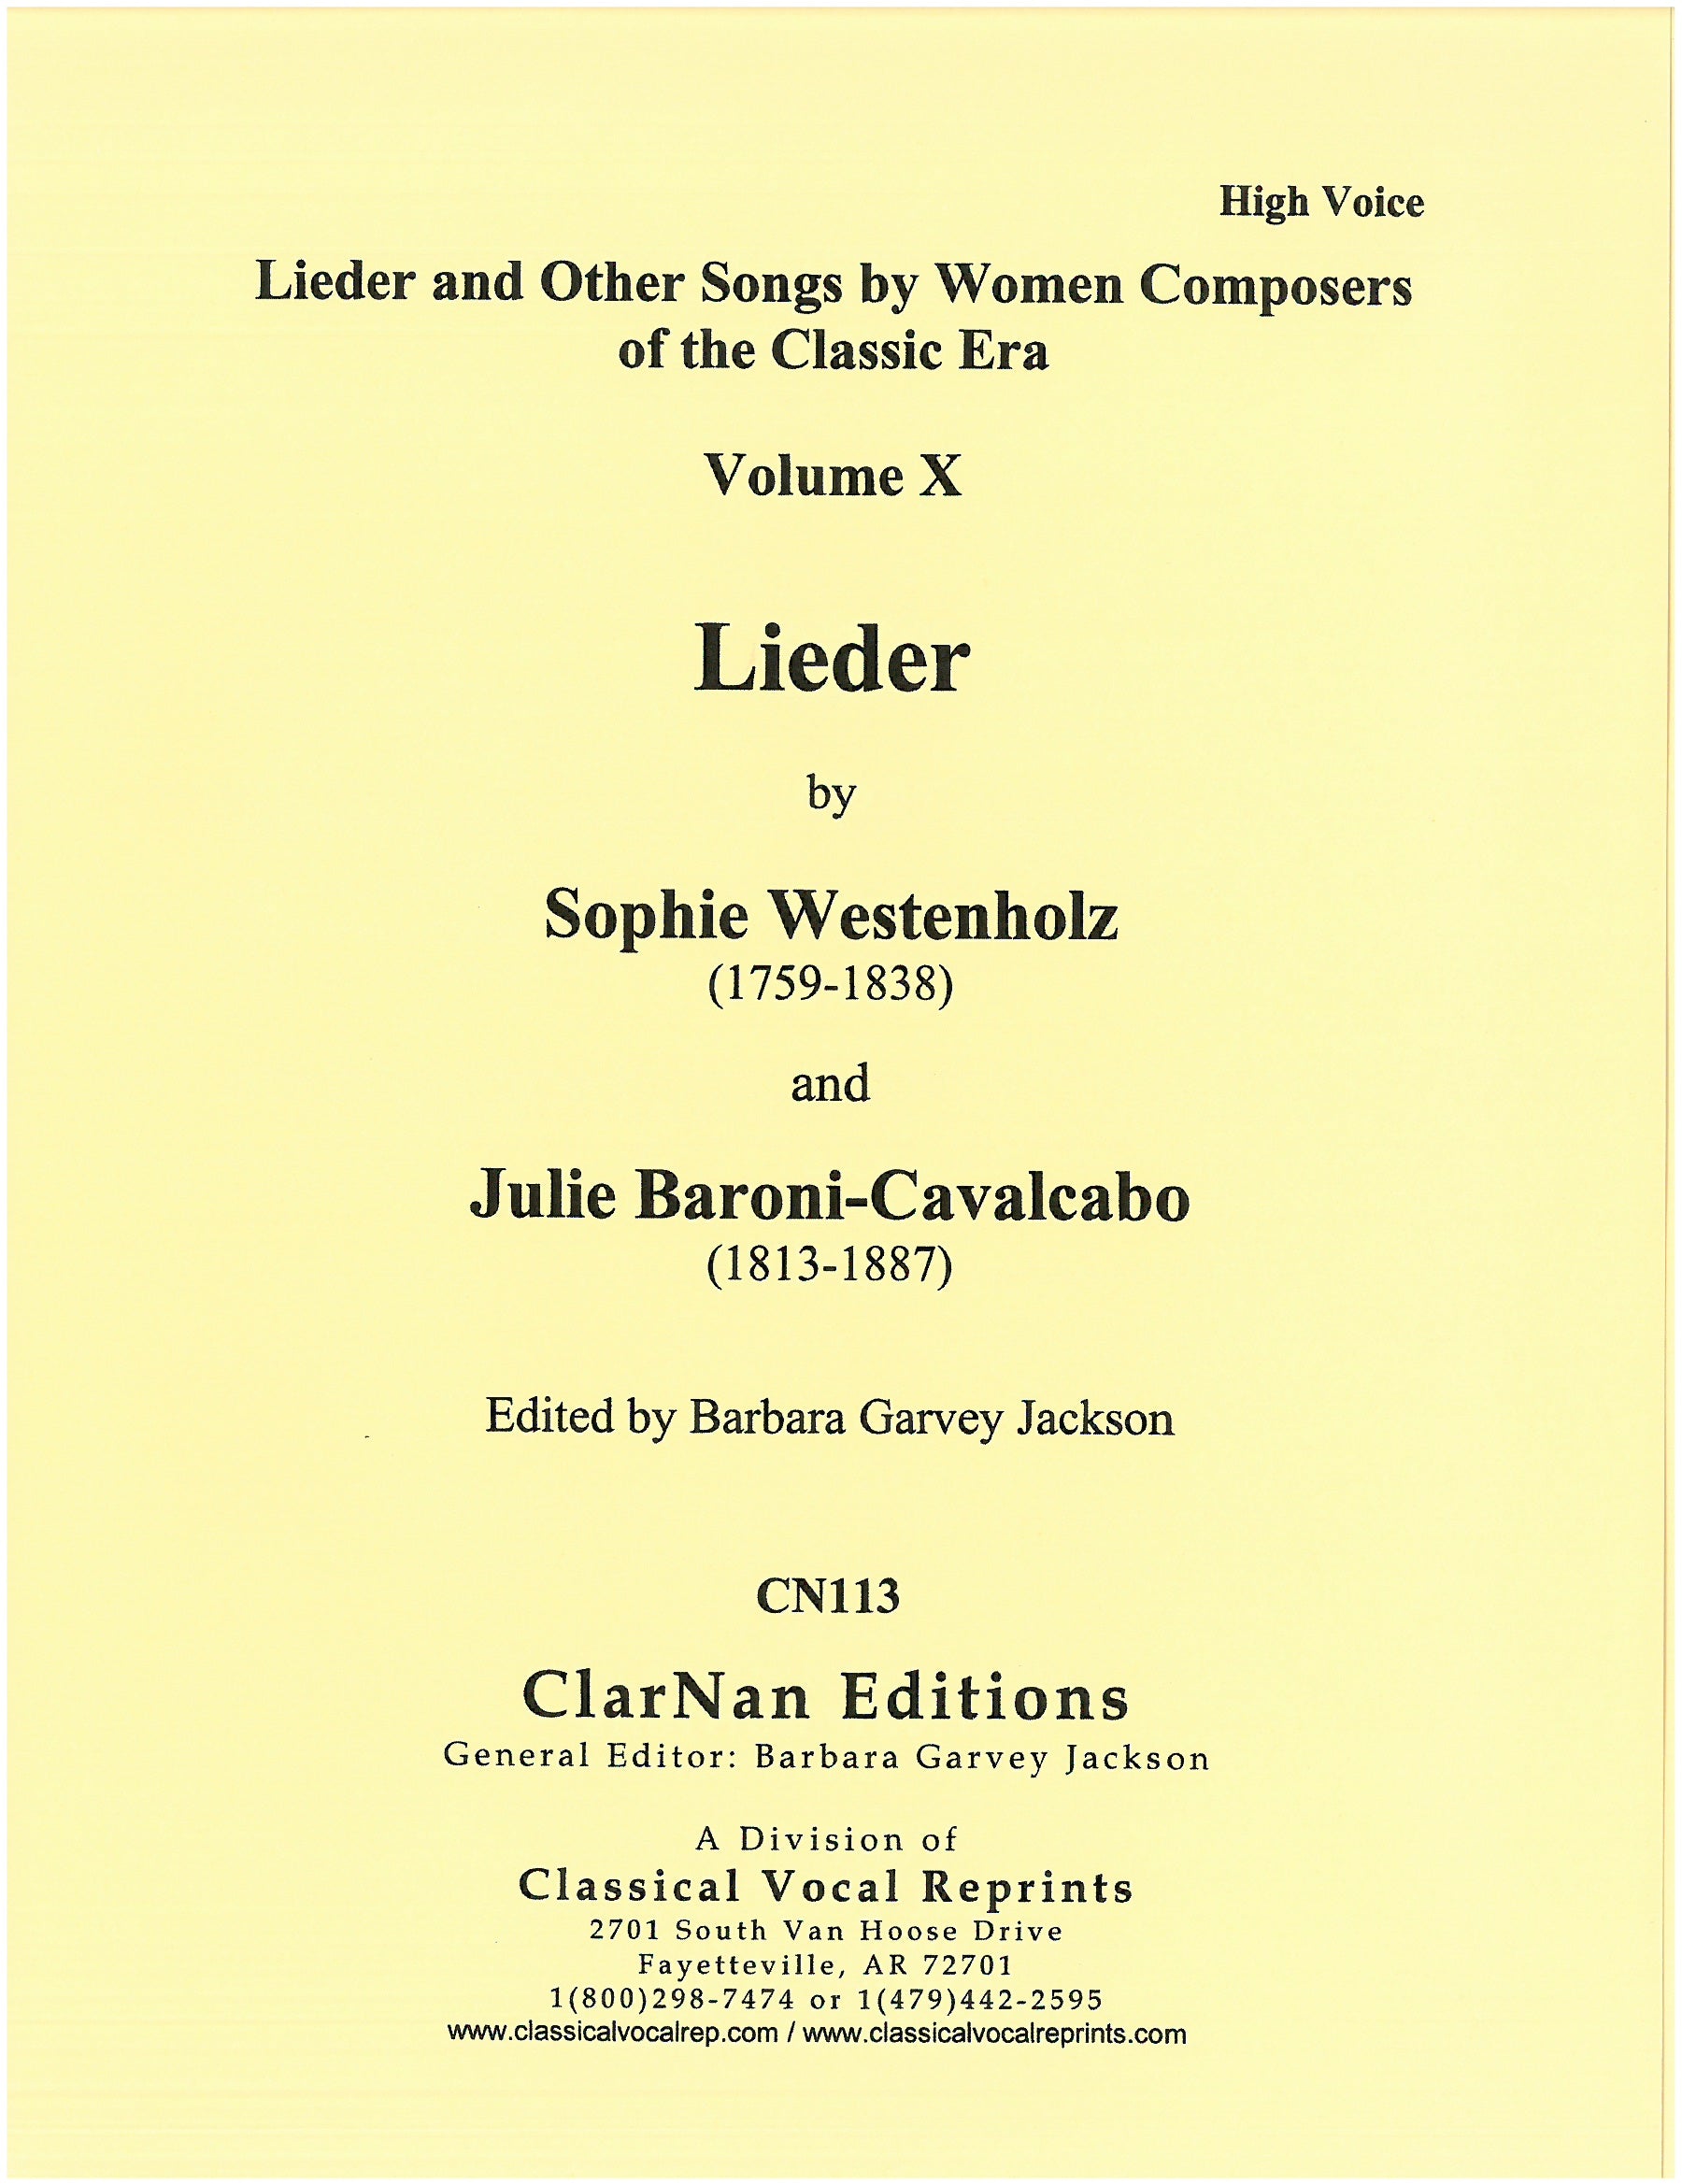 Lieder and Other Songs by Women Composers of the Classic Era - Volume 10